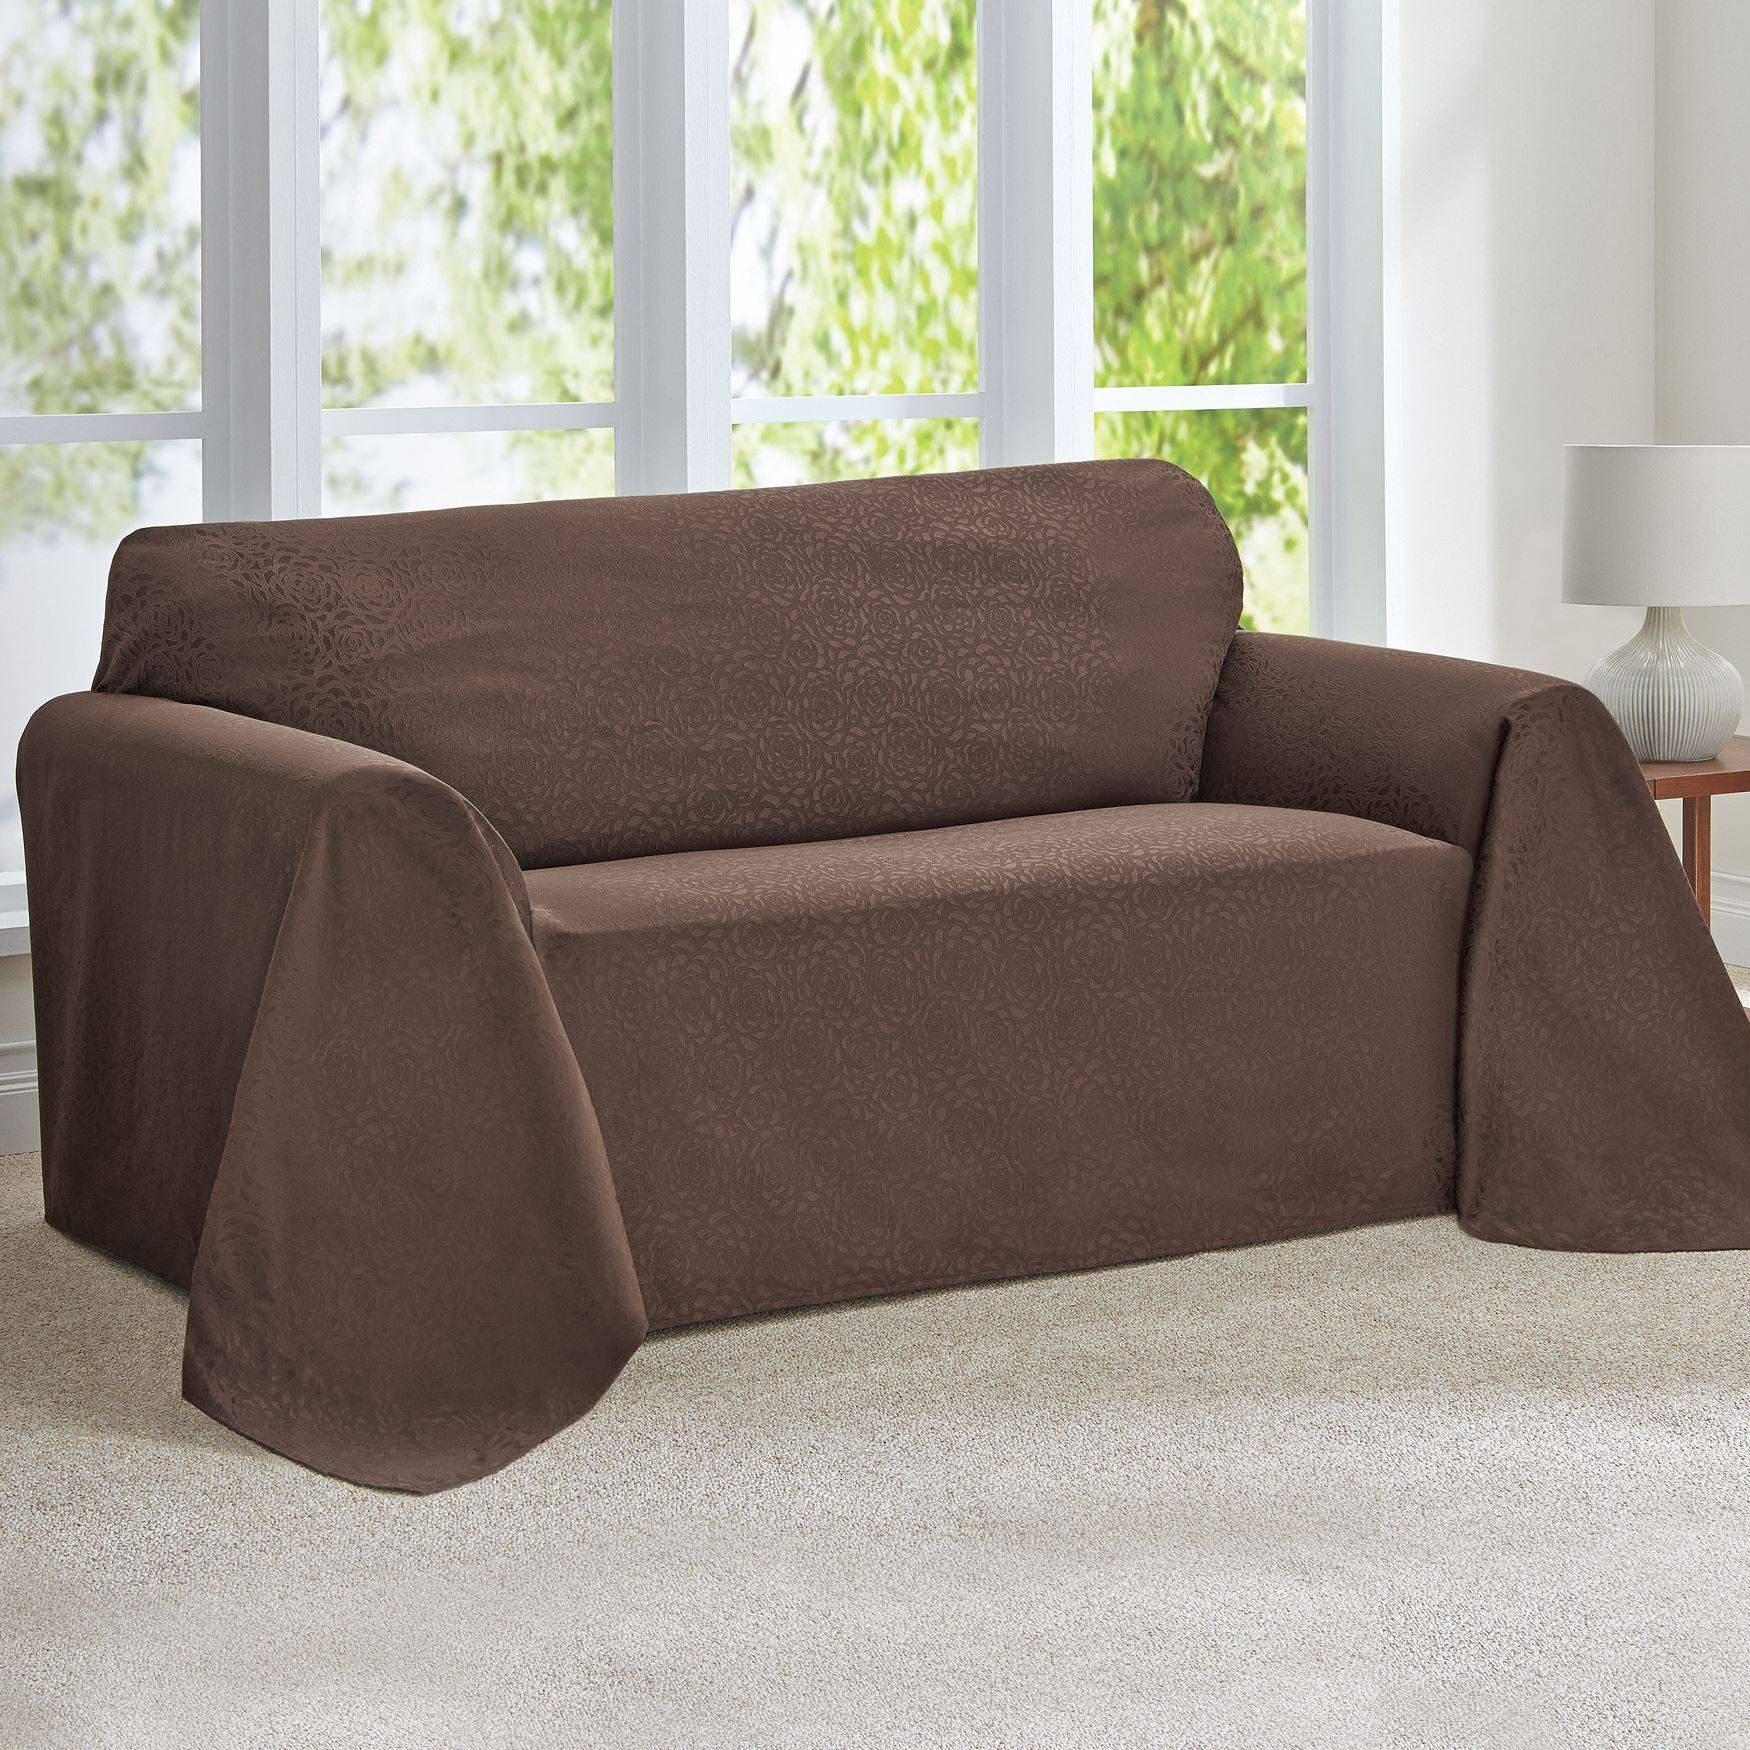 Furniture: Couch Covers At Walmart To Make Your Furniture Stylish For Walmart Slipcovers For Sofas (View 11 of 30)